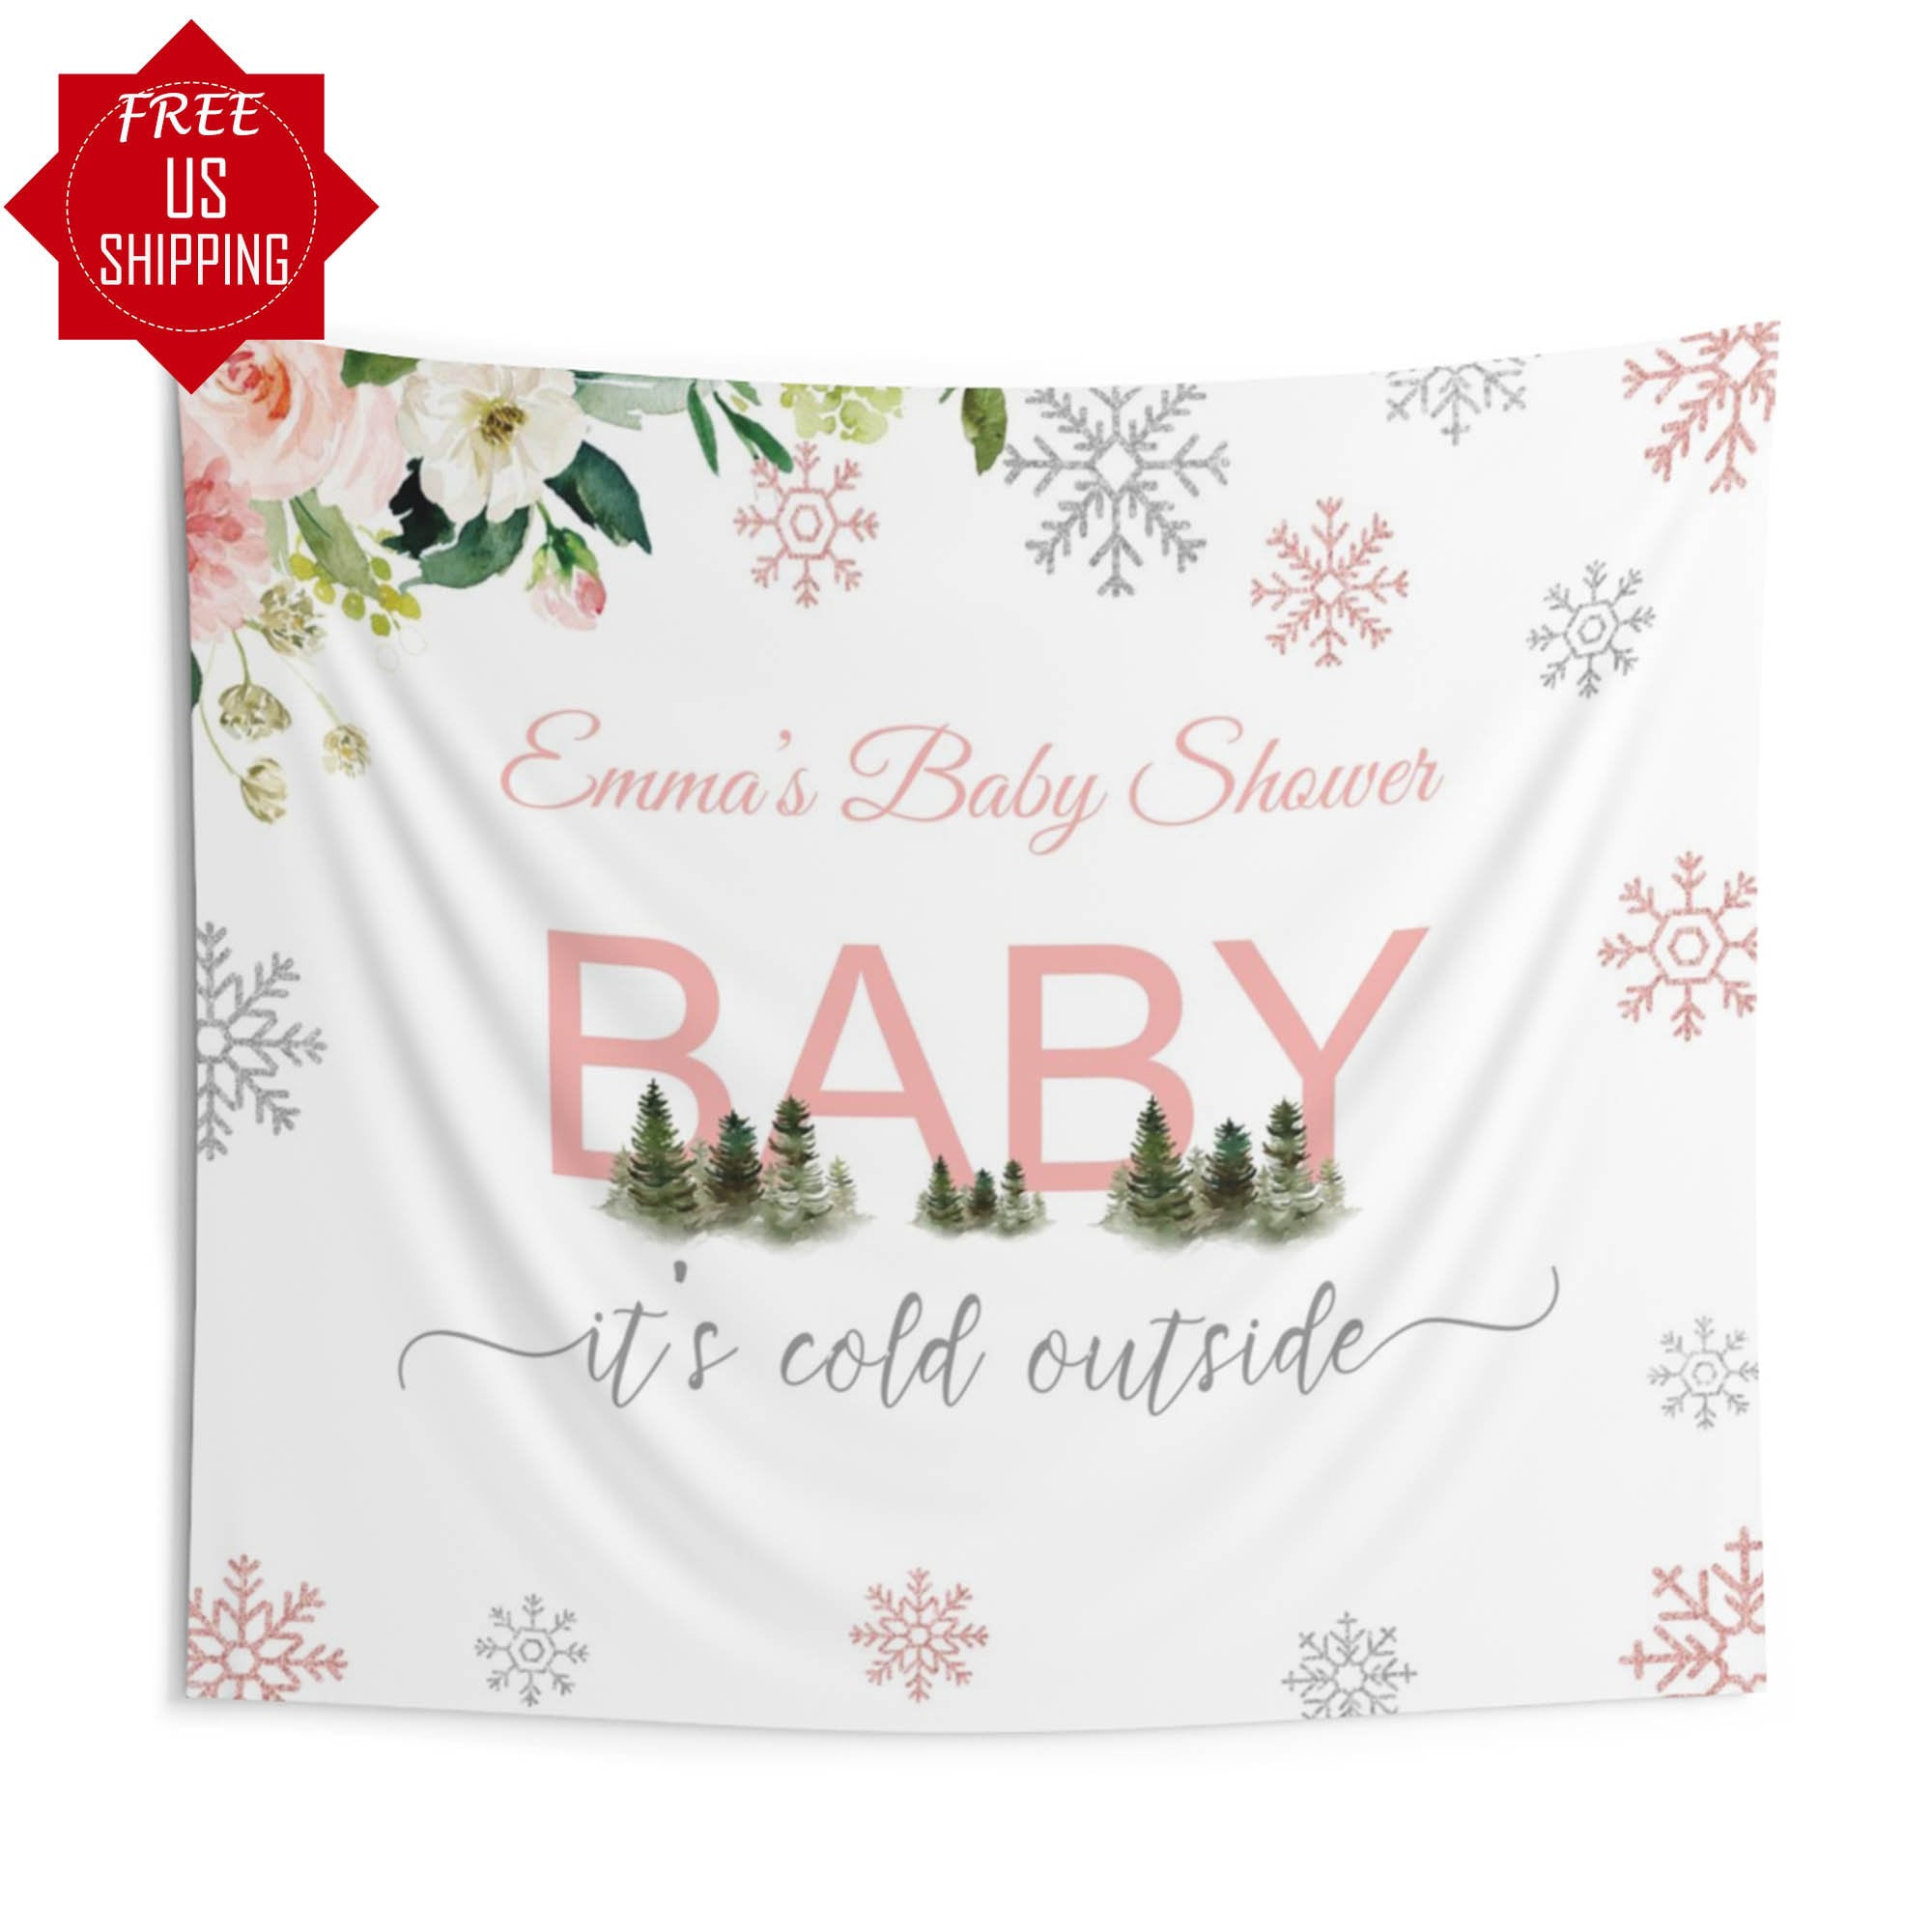 Winter wonderland baby shower, Custom Baby Shower Backdrop, Wnter baby shower decorations, Baby It's Cold Outside